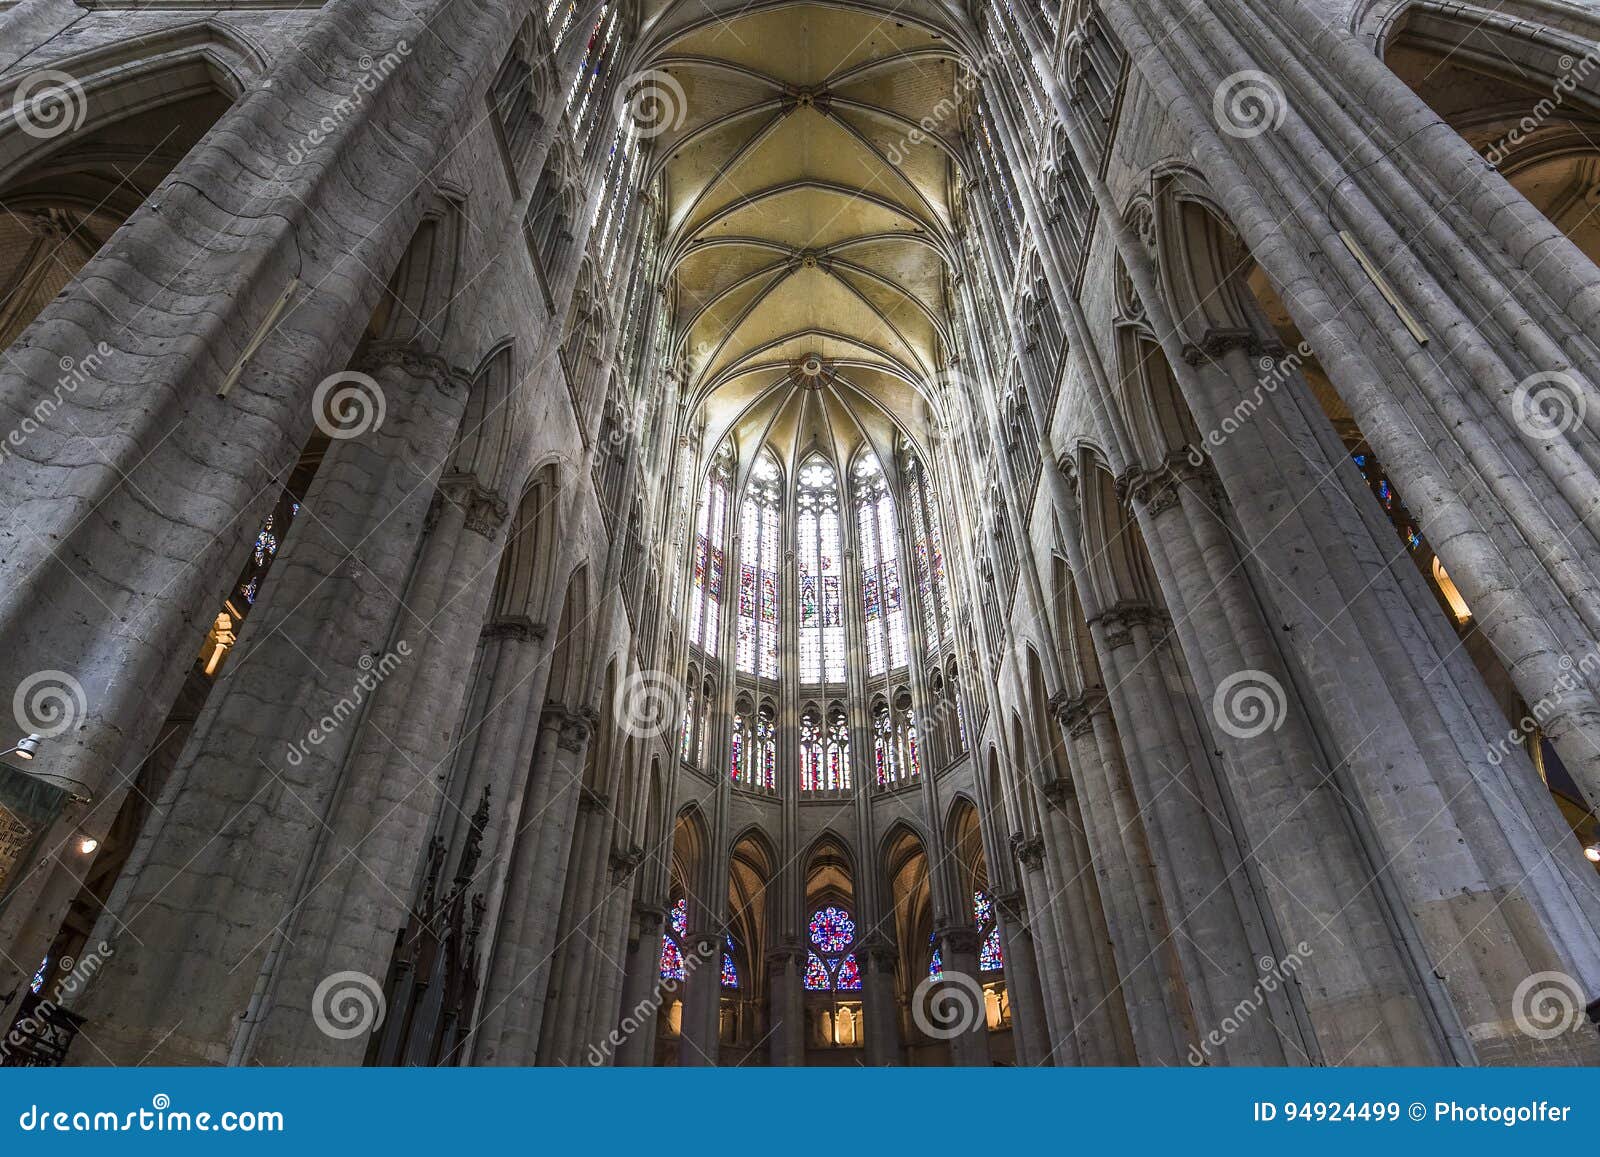 Saint Peter Beauvais Cathedral In Beauvais France Editorial Stock Image Image Of France Picardie 94924499